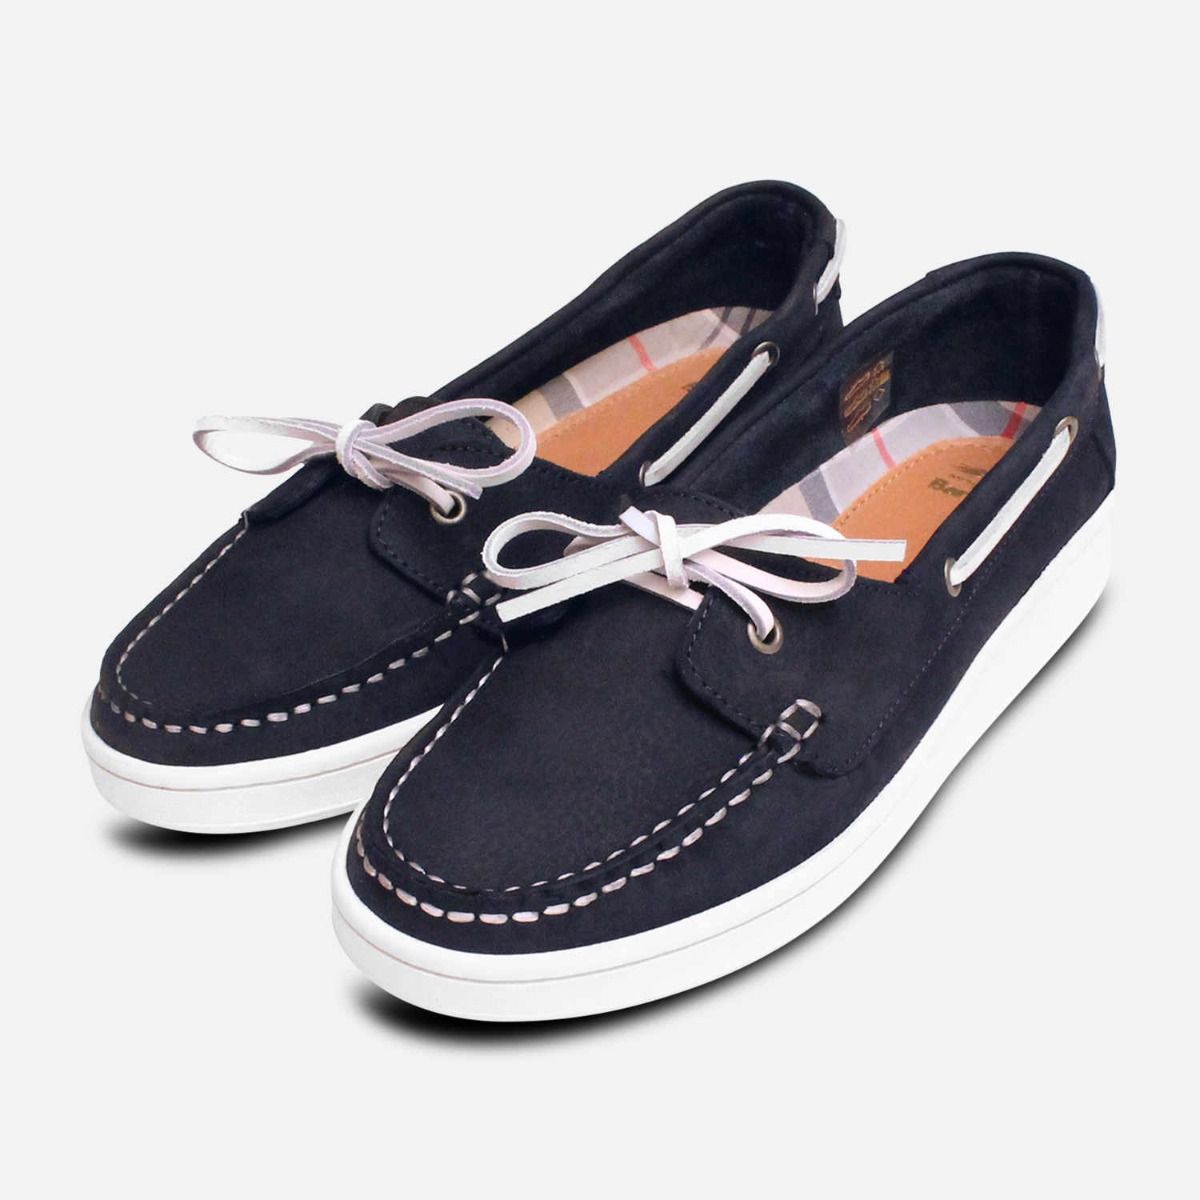 LADIES DECK/BOAT SHOES SIZES 5-8 UK NAVY/TAN SLIP ON FAUX NUBUCK FROM COOLERS 